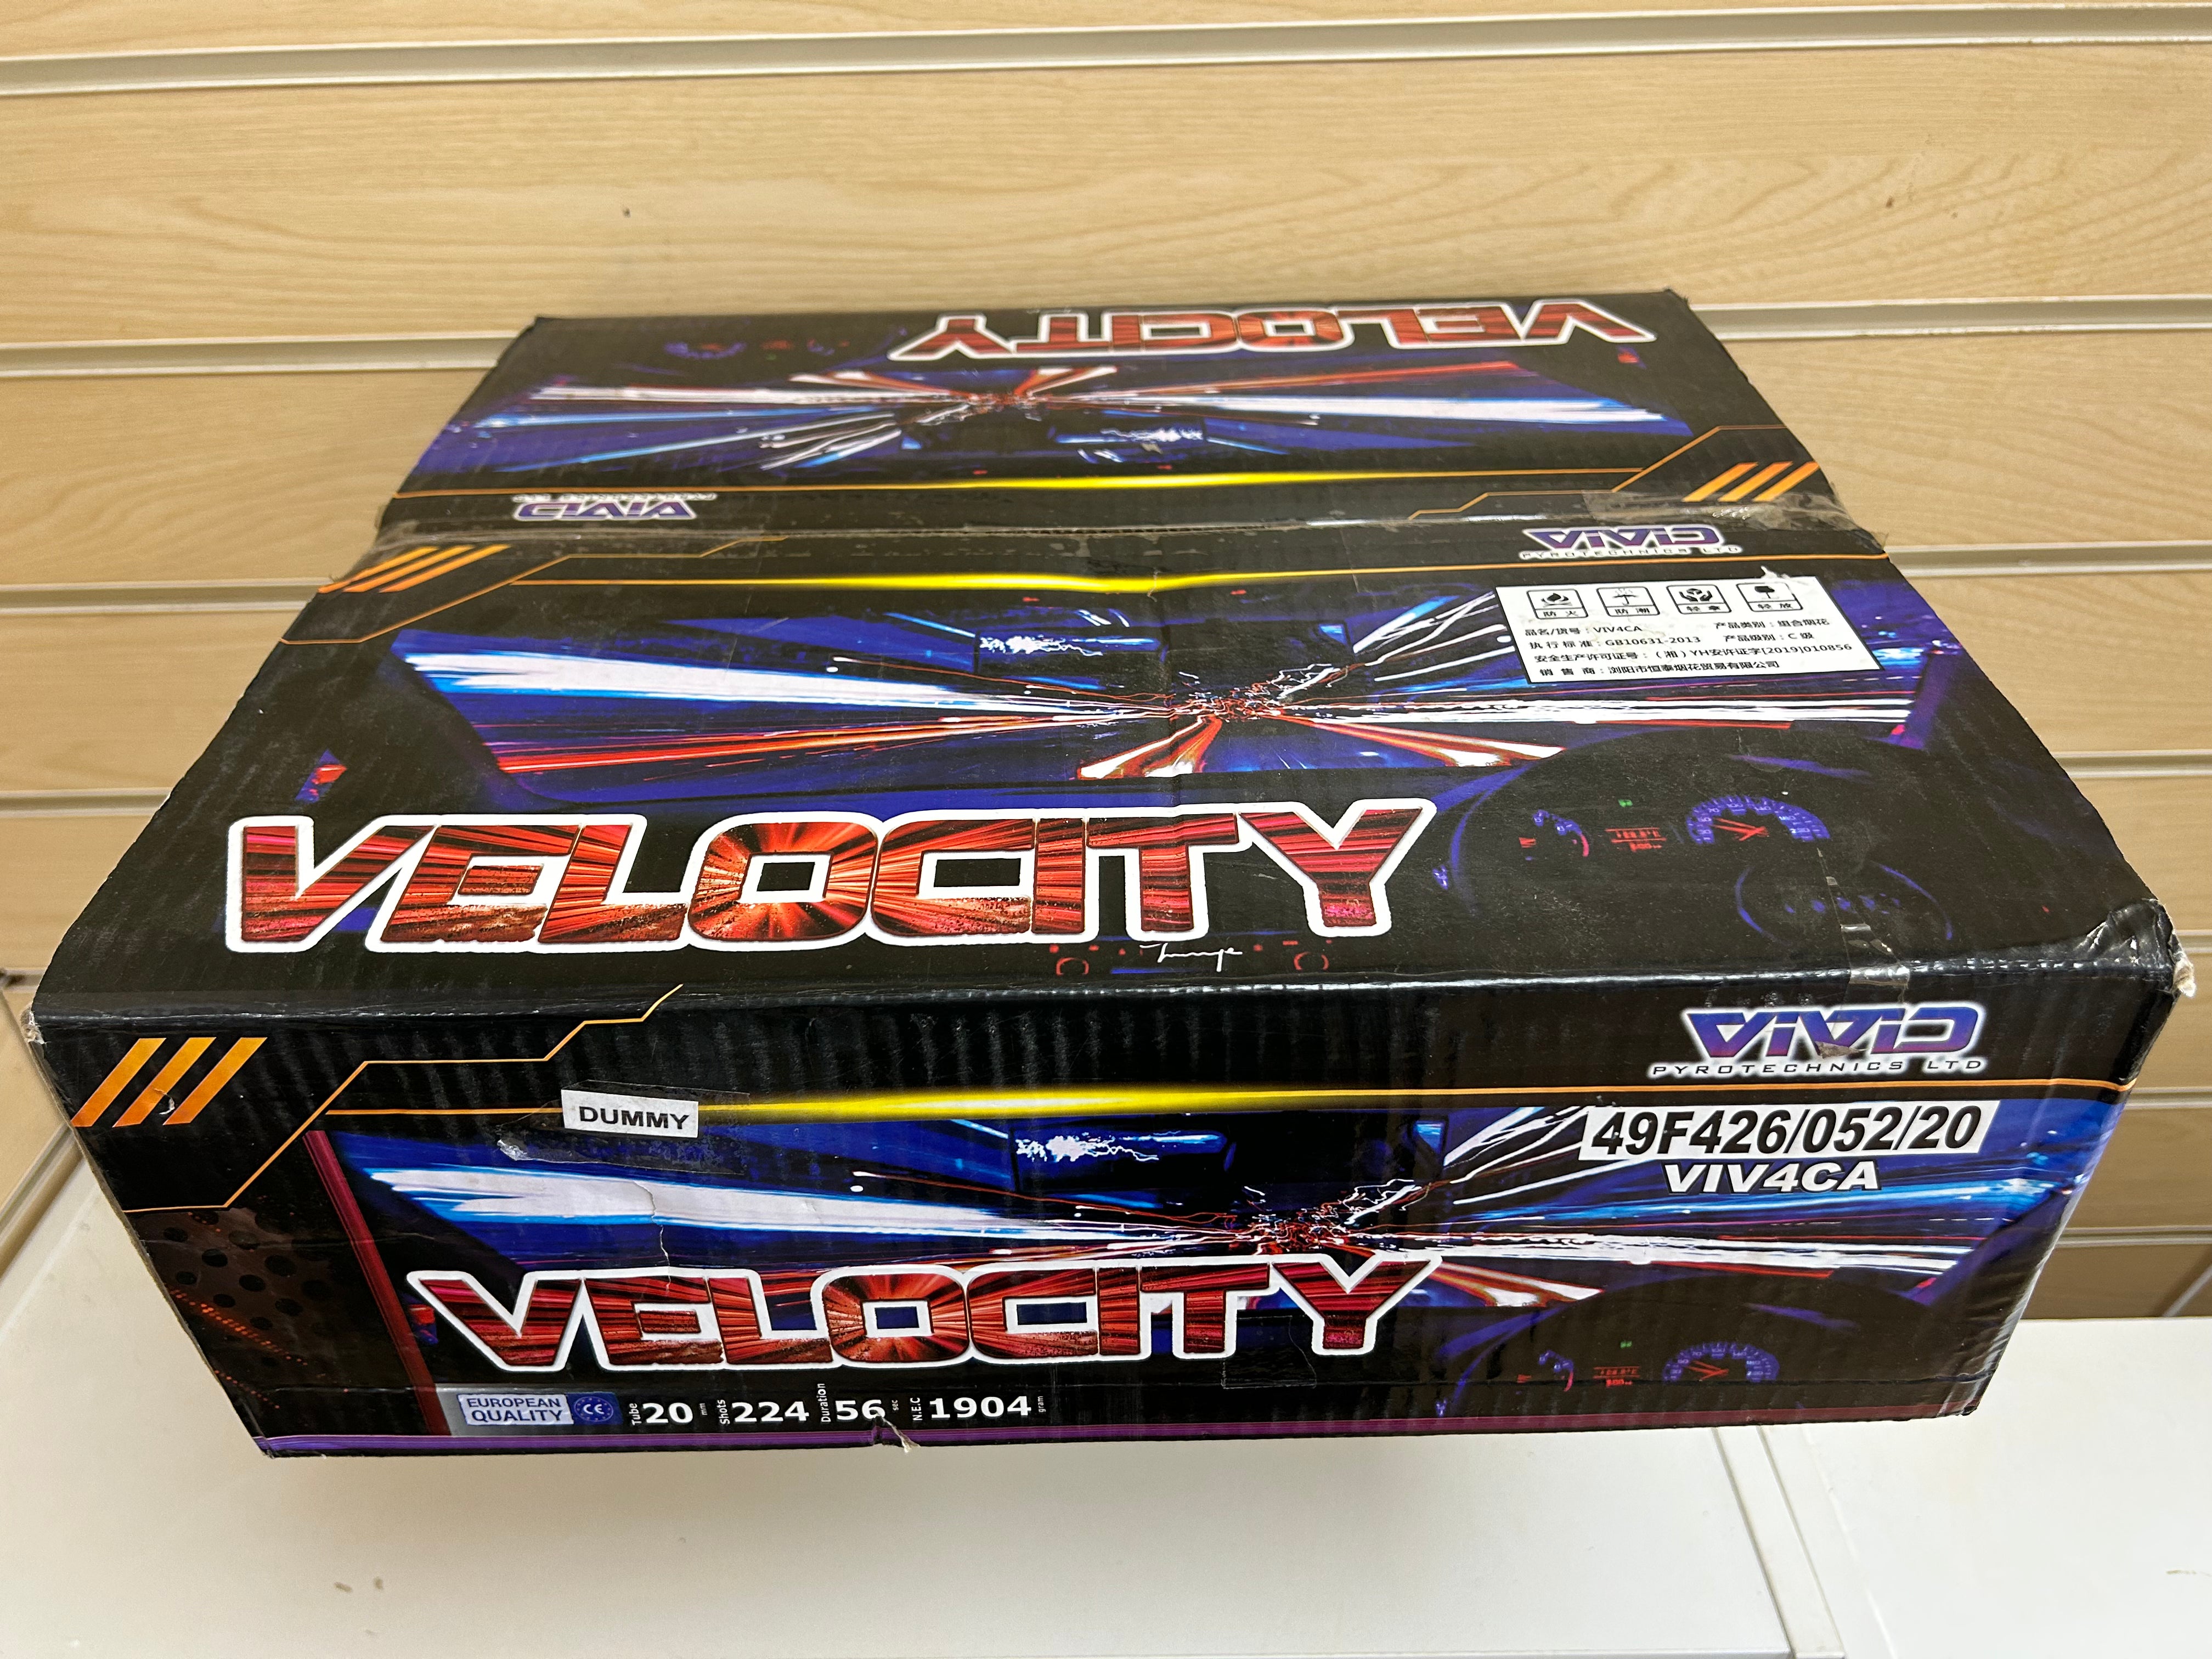 Velocity ( Voted Best Compound Firework Under 2550 g Nec , 1st Place For 2023 )